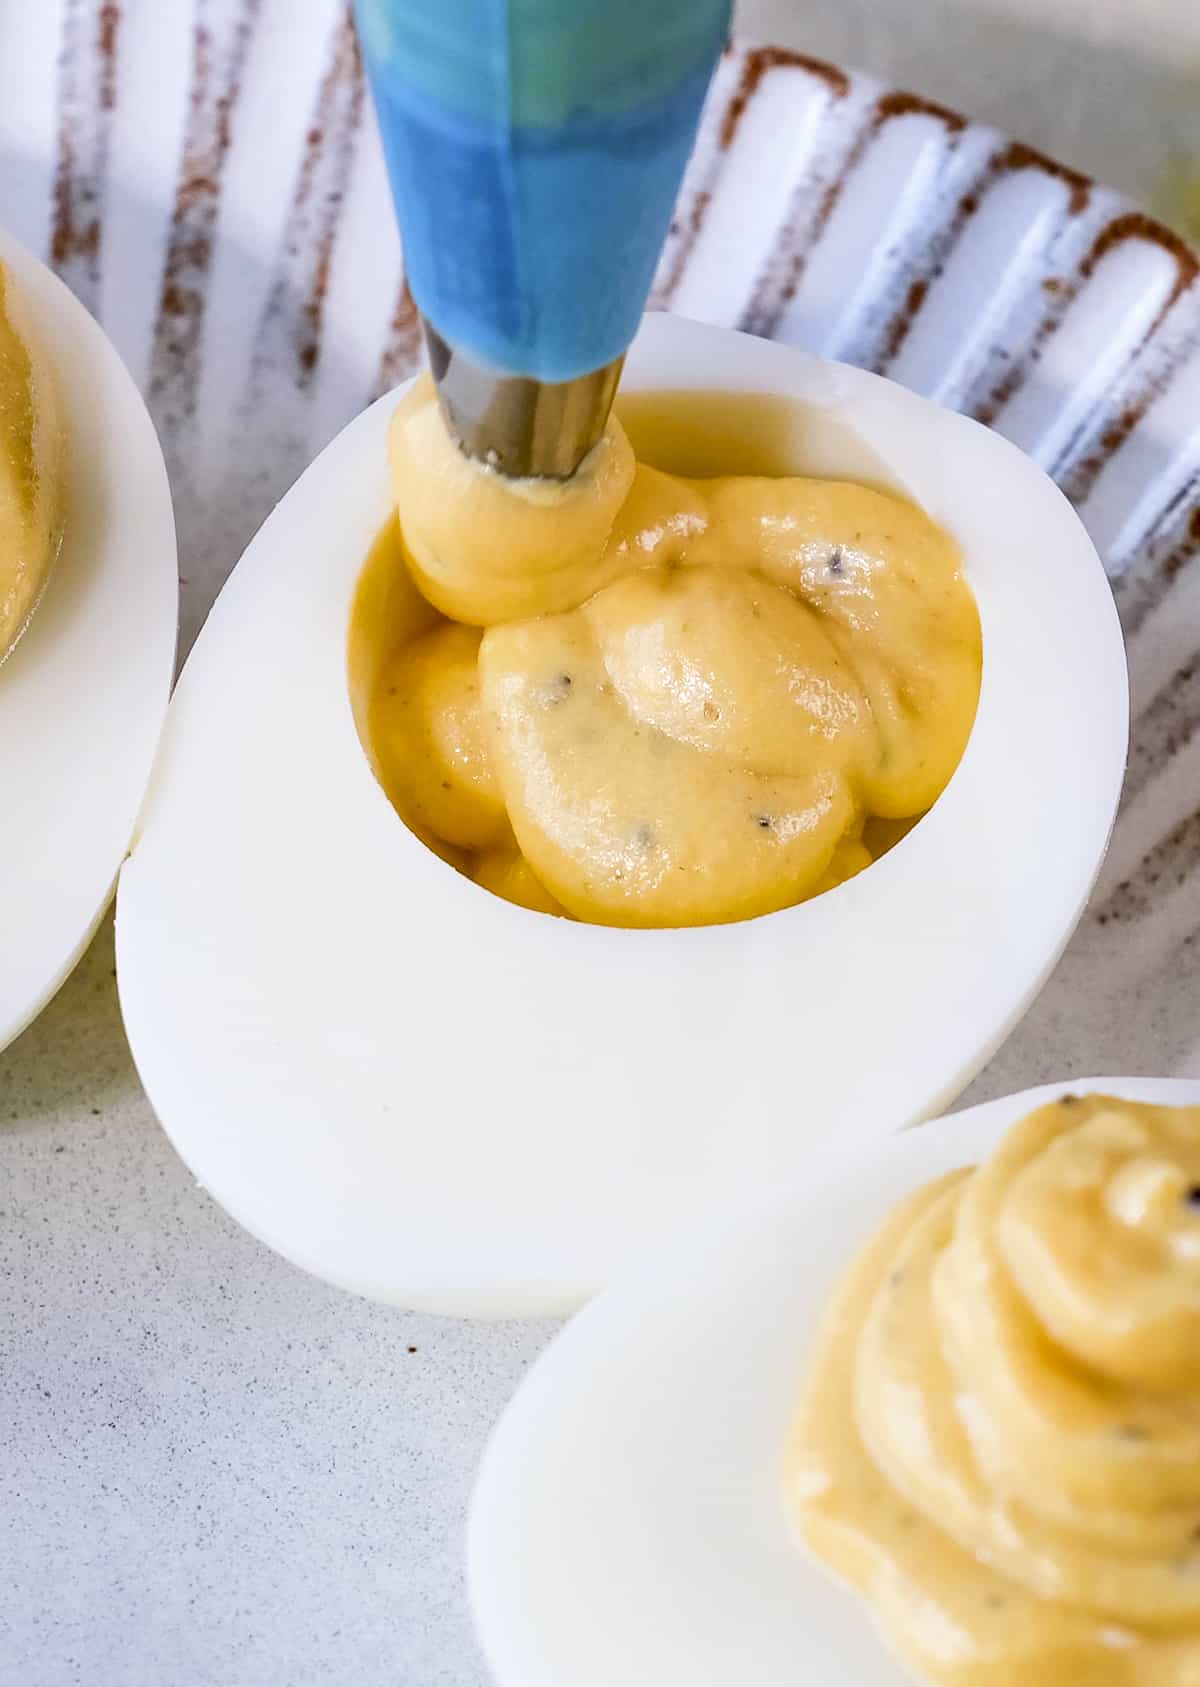 A piping bag filling the egg white halves with the egg yolk mixture.